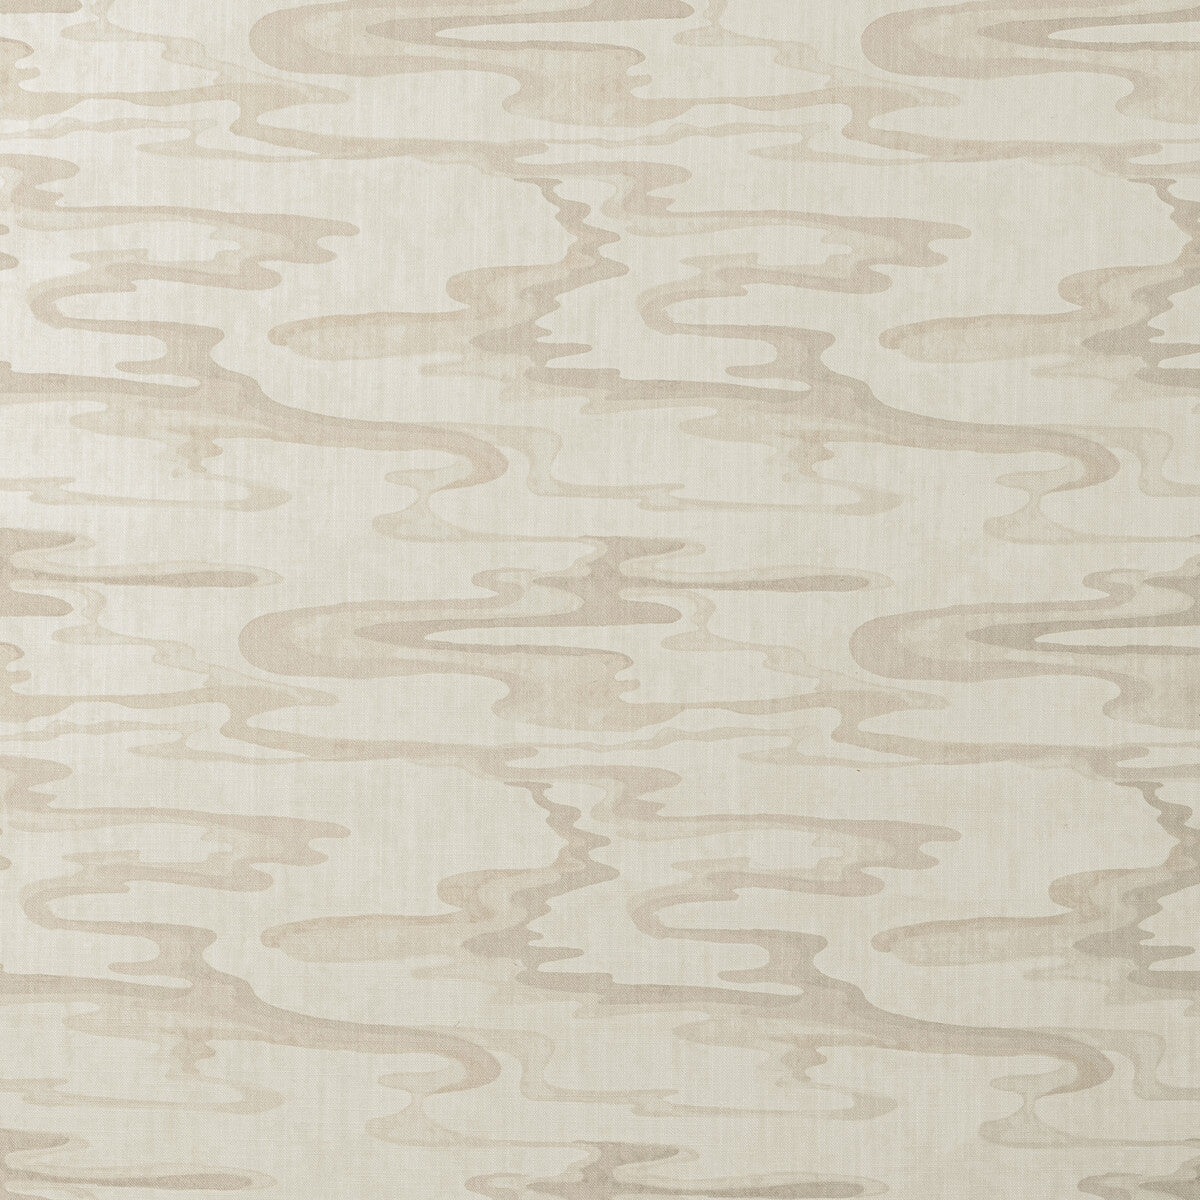 Dreamland fabric in cameo color - pattern DREAMLAND.16.0 - by Kravet Basics in the Candice Olson collection